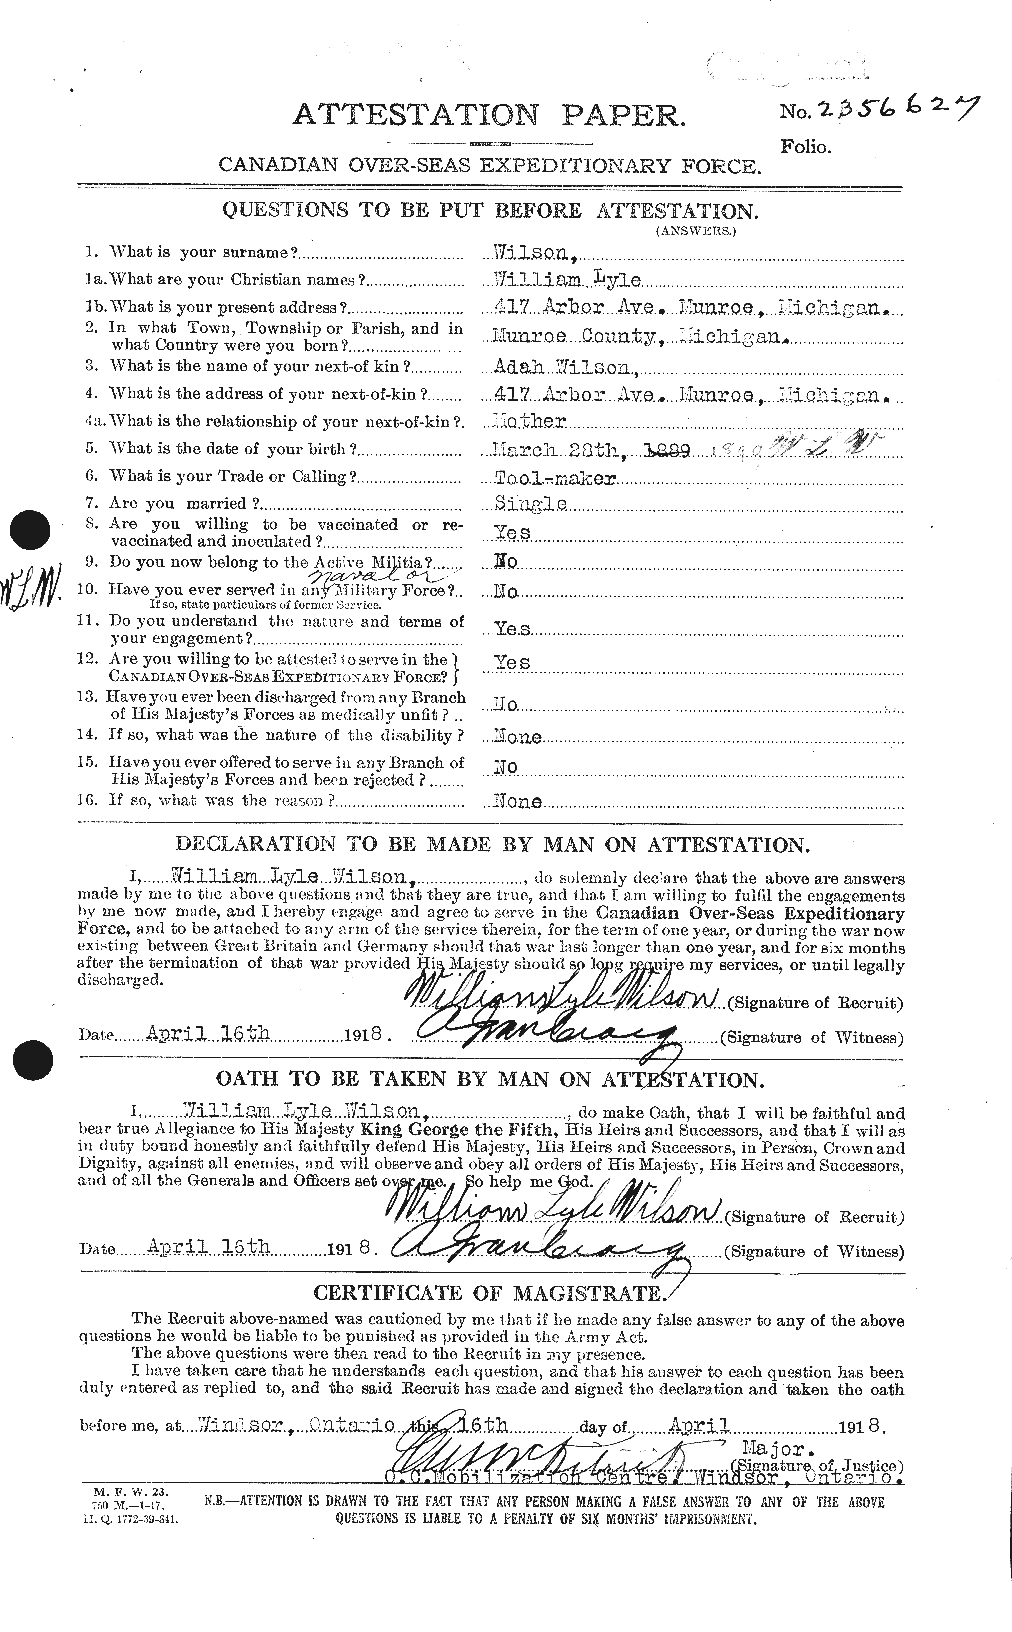 Personnel Records of the First World War - CEF 684073a